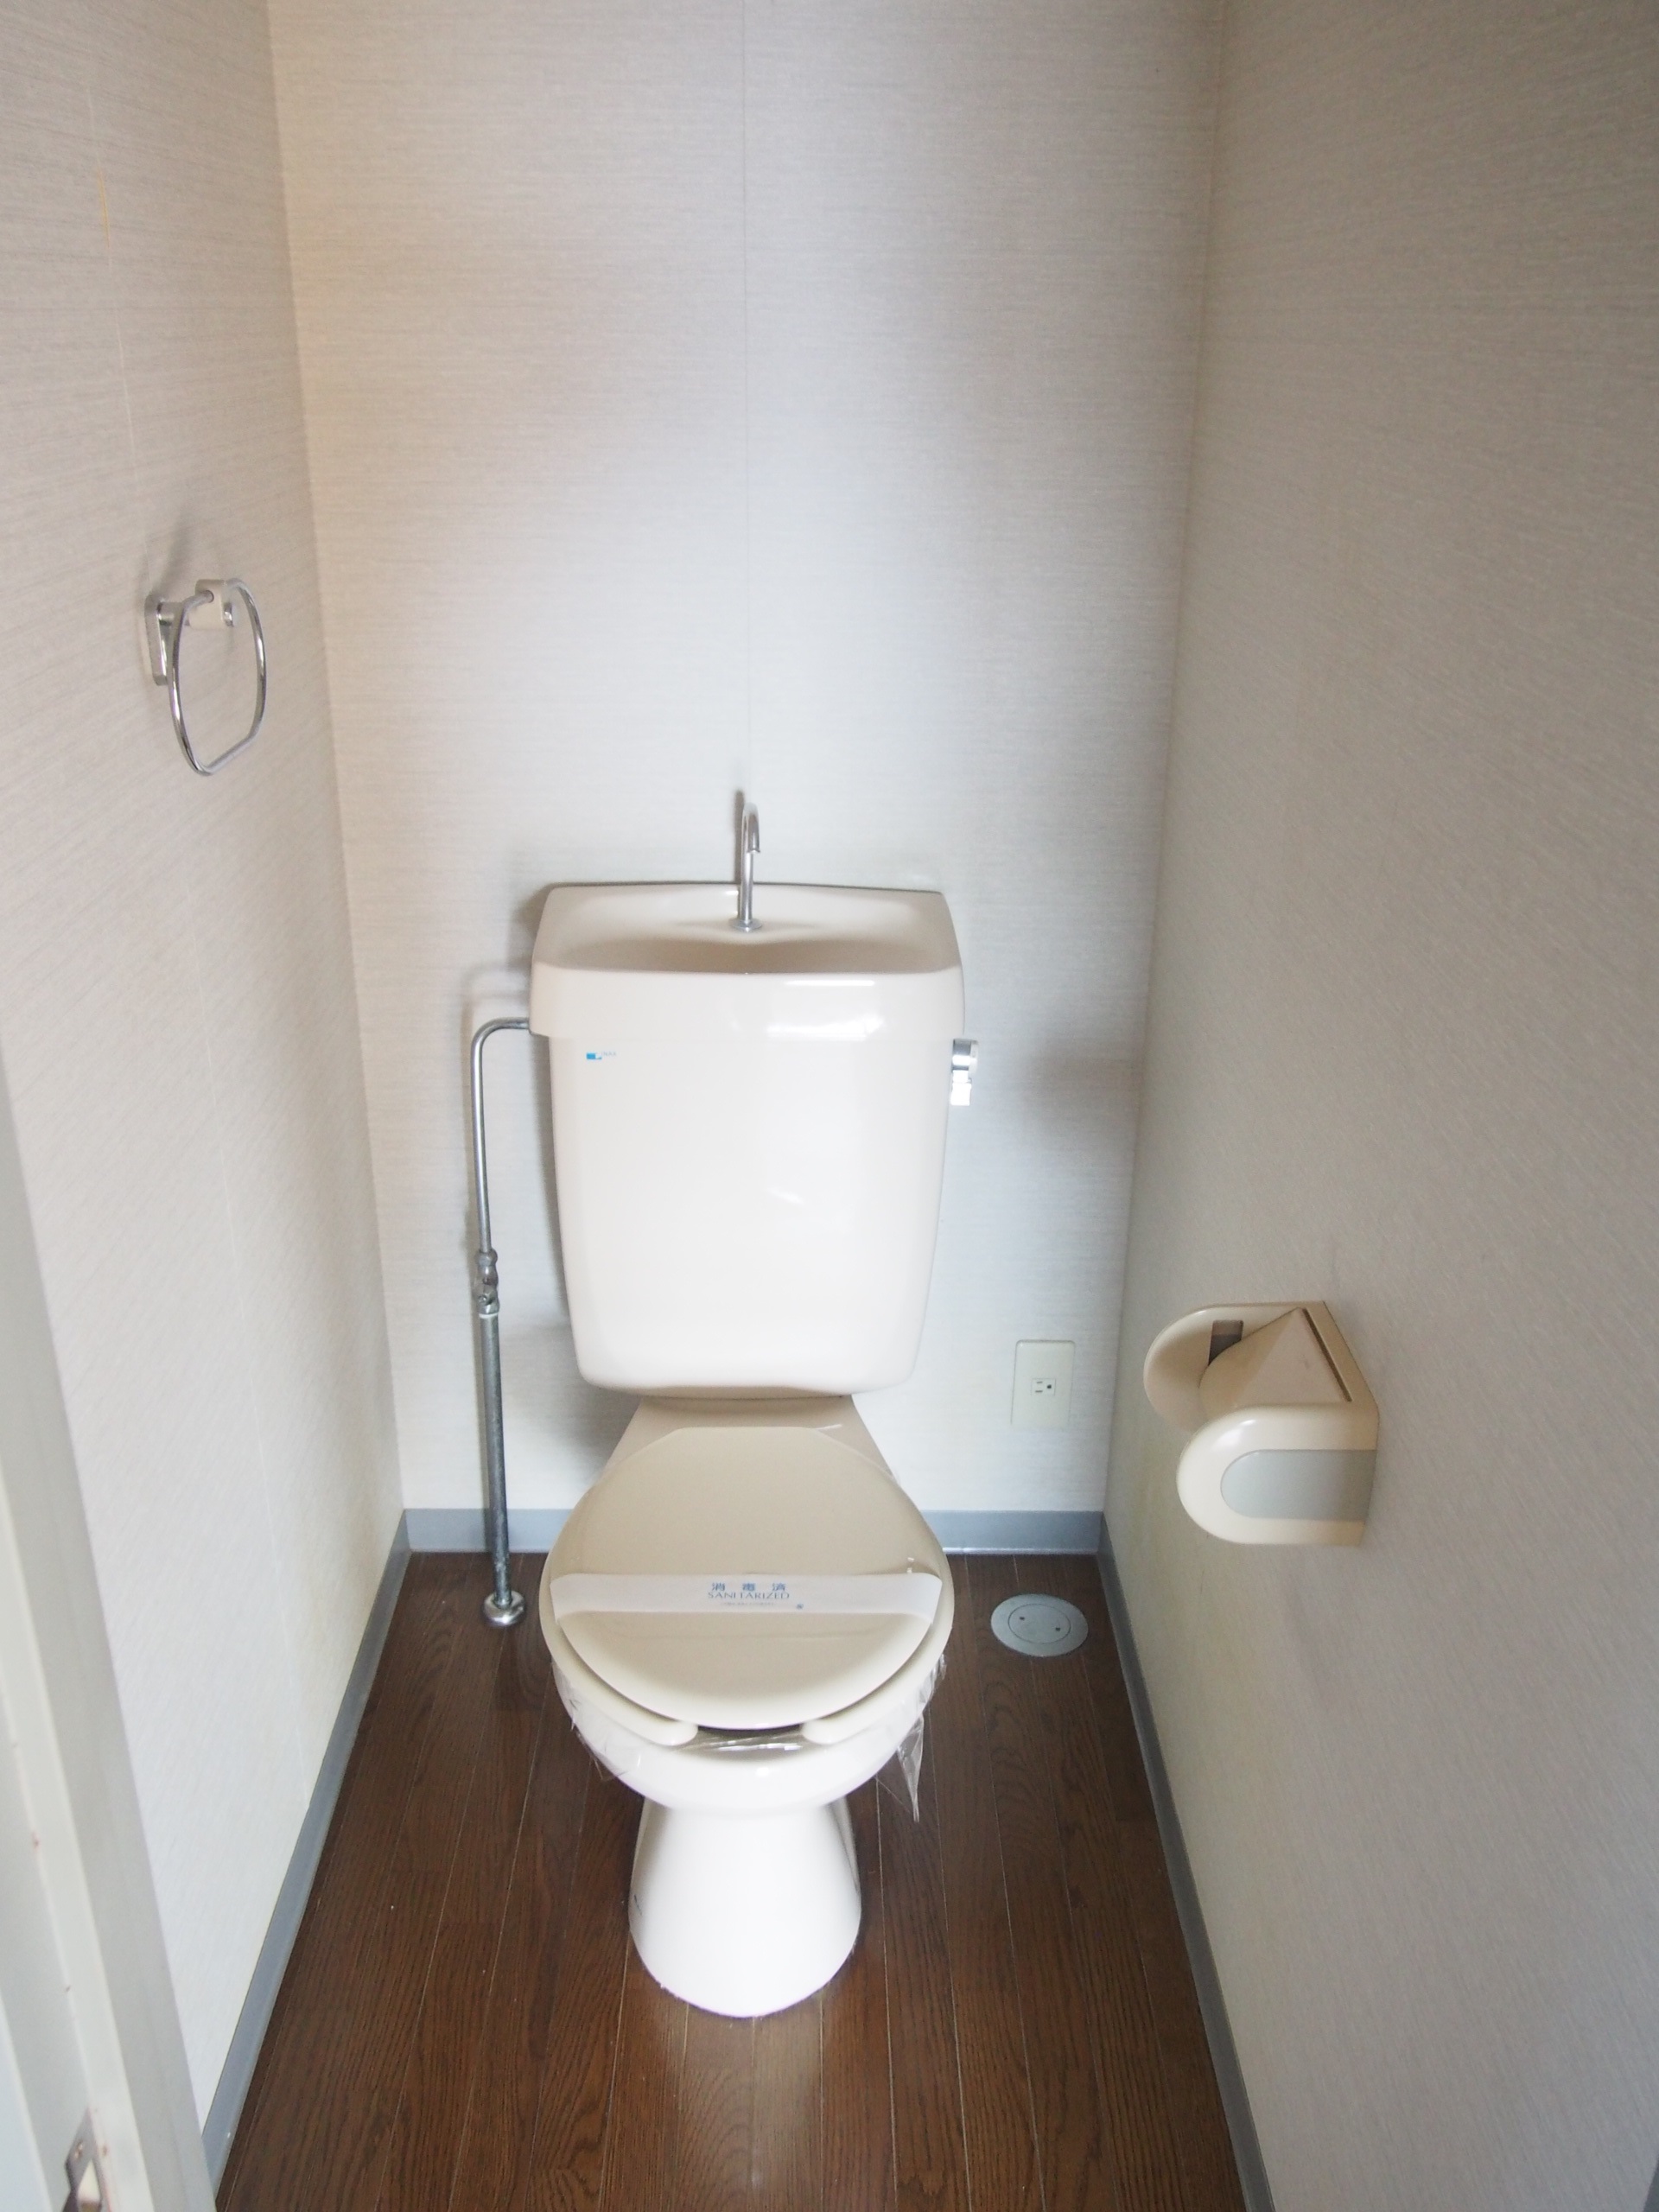 Toilet. Hiroi toilet. It is ideal for thinking.